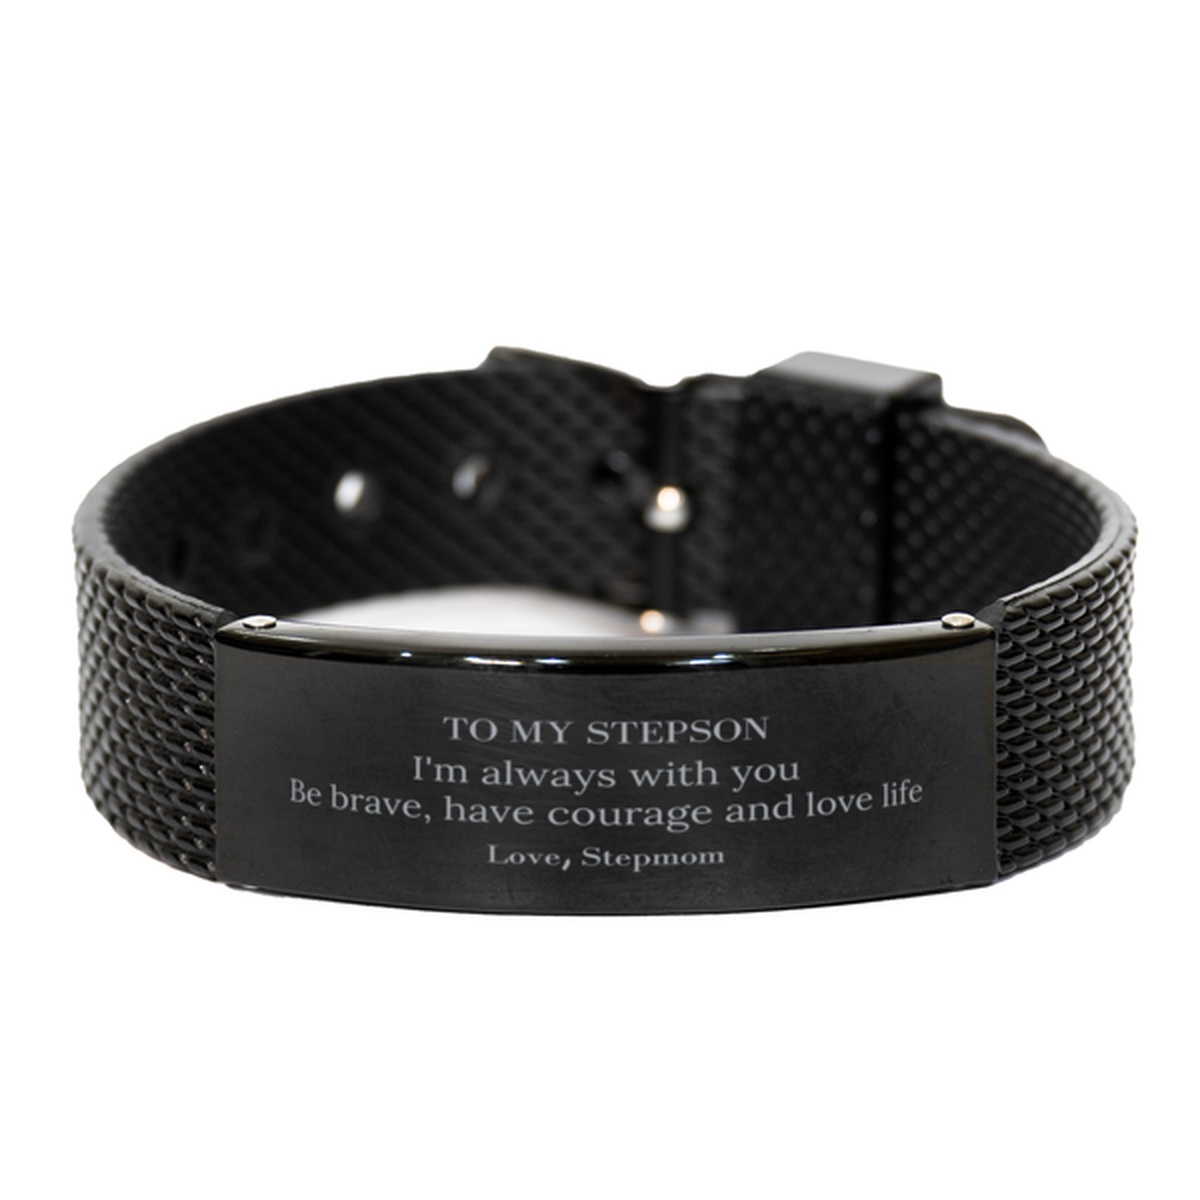 To My Stepson Gifts from Stepmom, Unique Black Shark Mesh Bracelet Inspirational Christmas Birthday Graduation Gifts for Stepson I'm always with you. Be brave, have courage and love life. Love, Stepmom